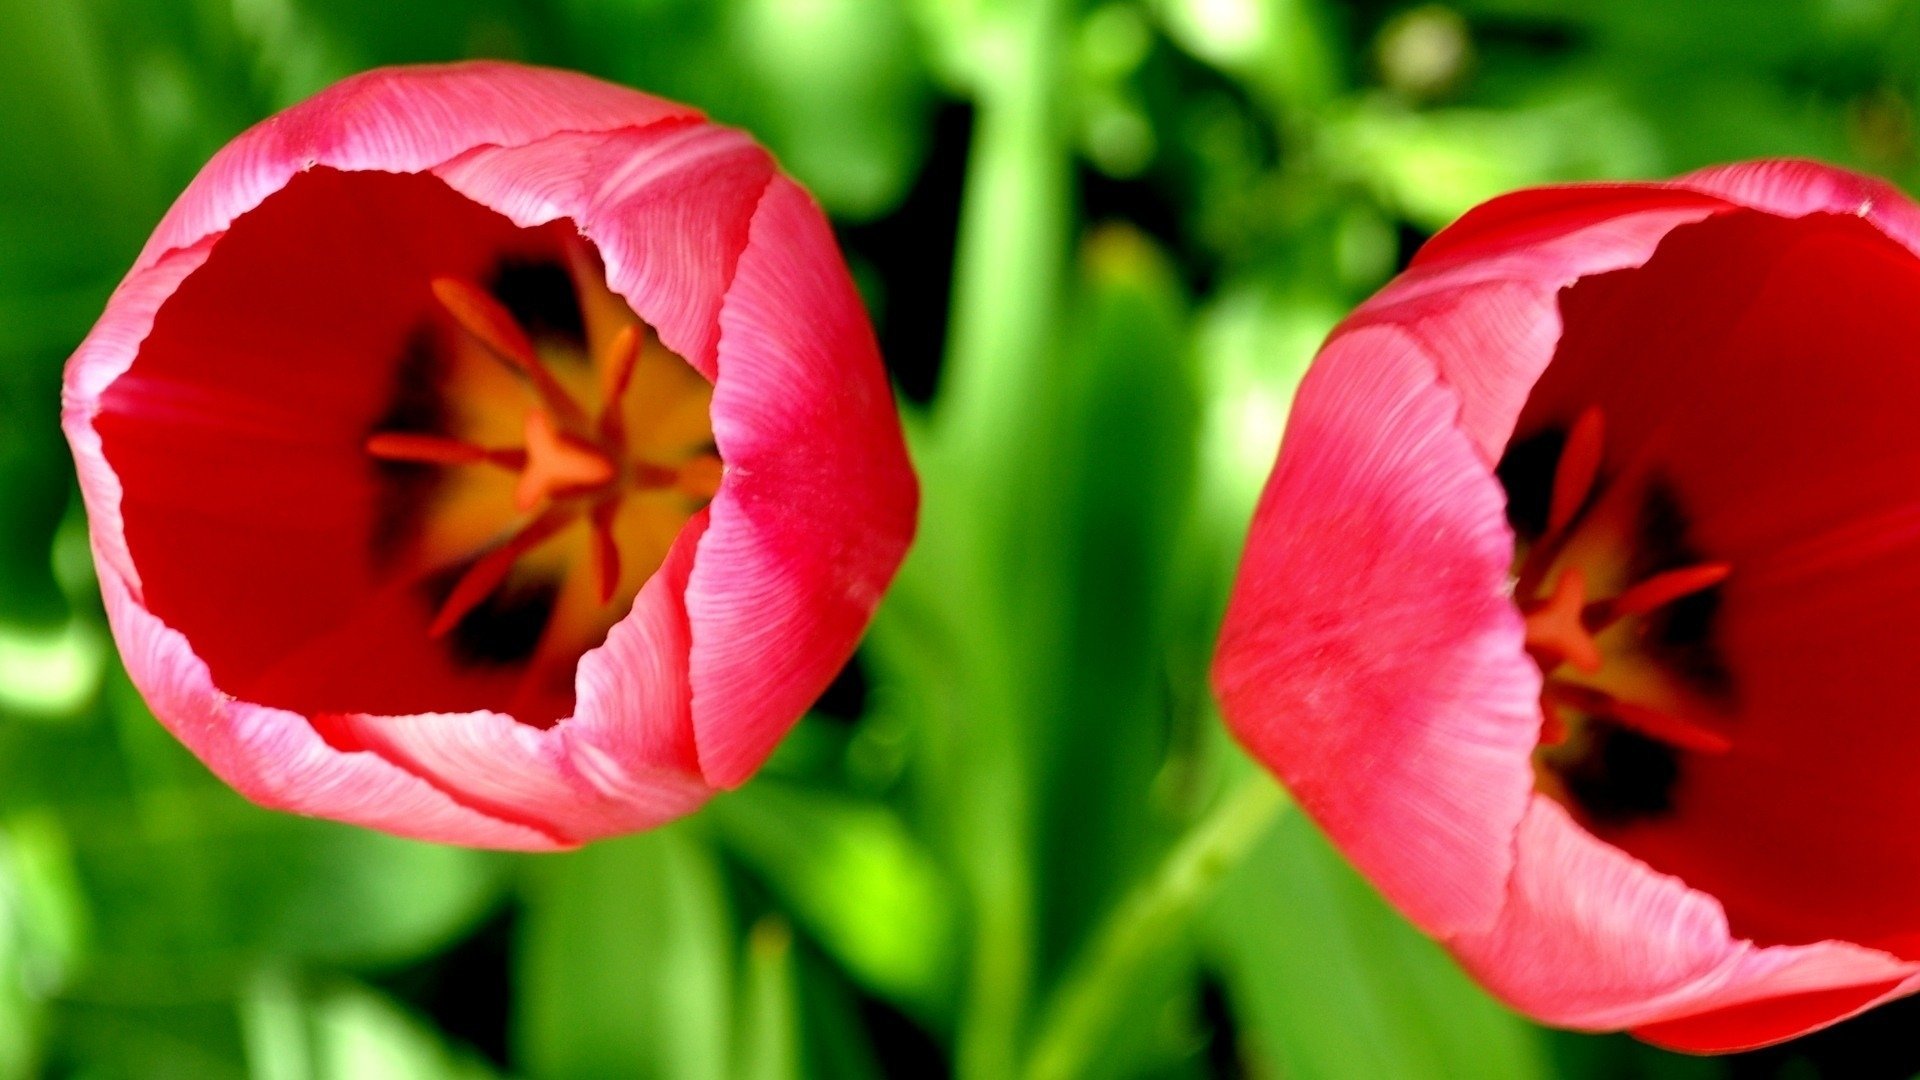 Download 1080p Tulip PC background ID:157467 for free